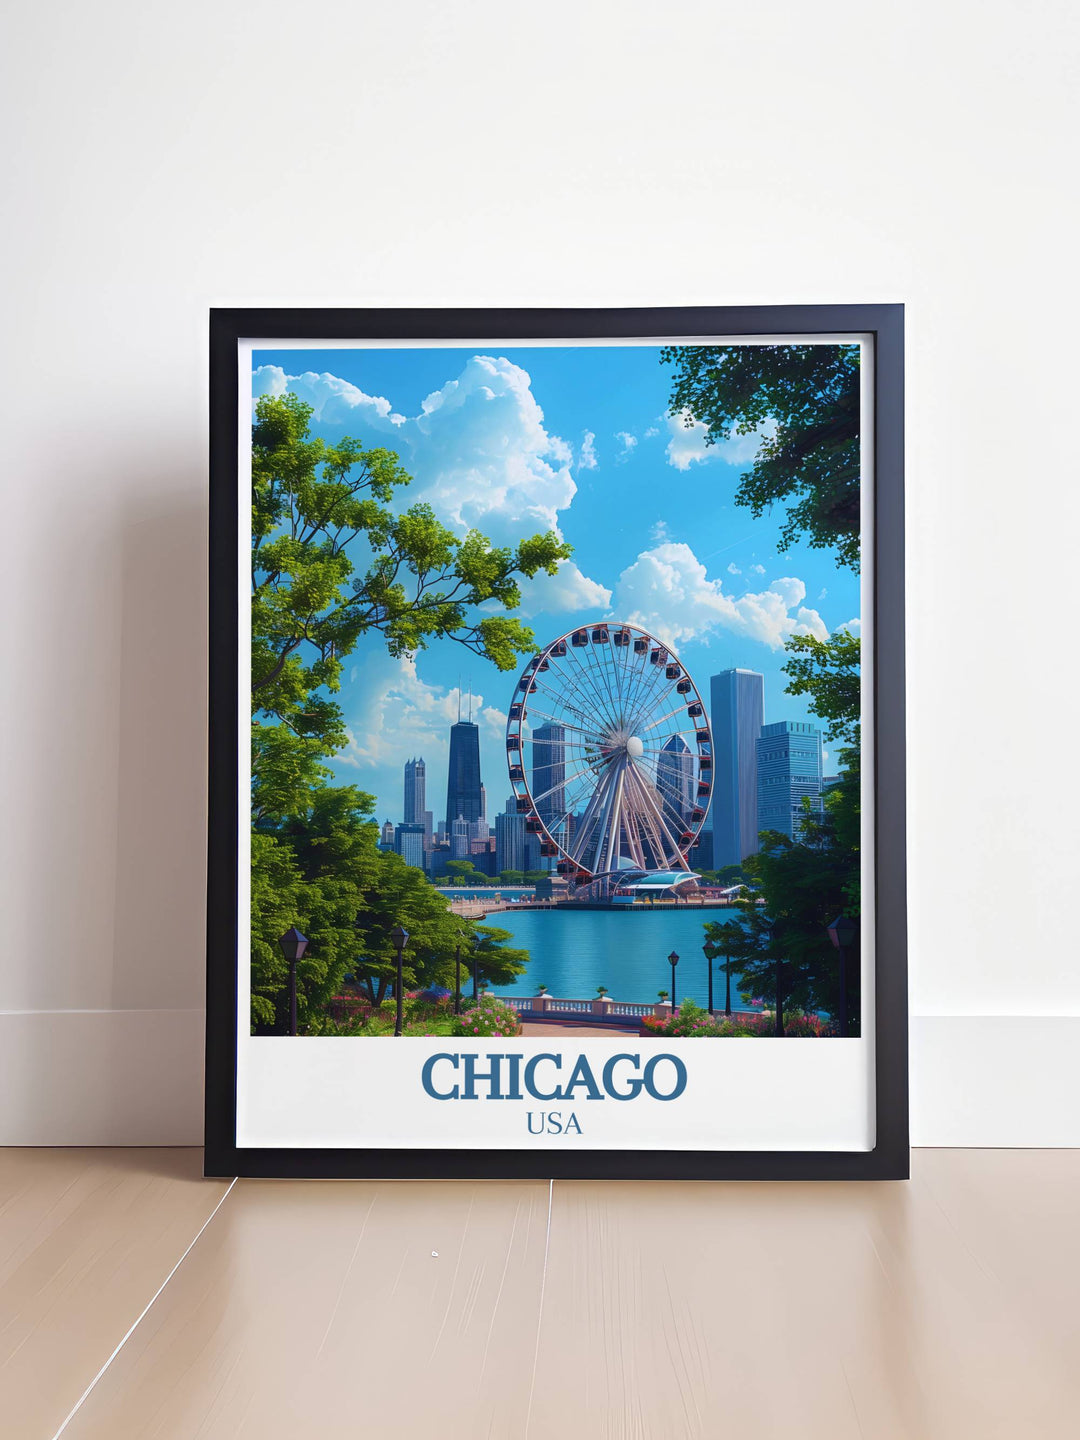 Navy Pier travel poster capturing the essence of Chicagos famous waterfront destination. Ideal for adding a touch of urban sophistication to your living space or office. This vintage print is a must have for anyone who loves Chicago.